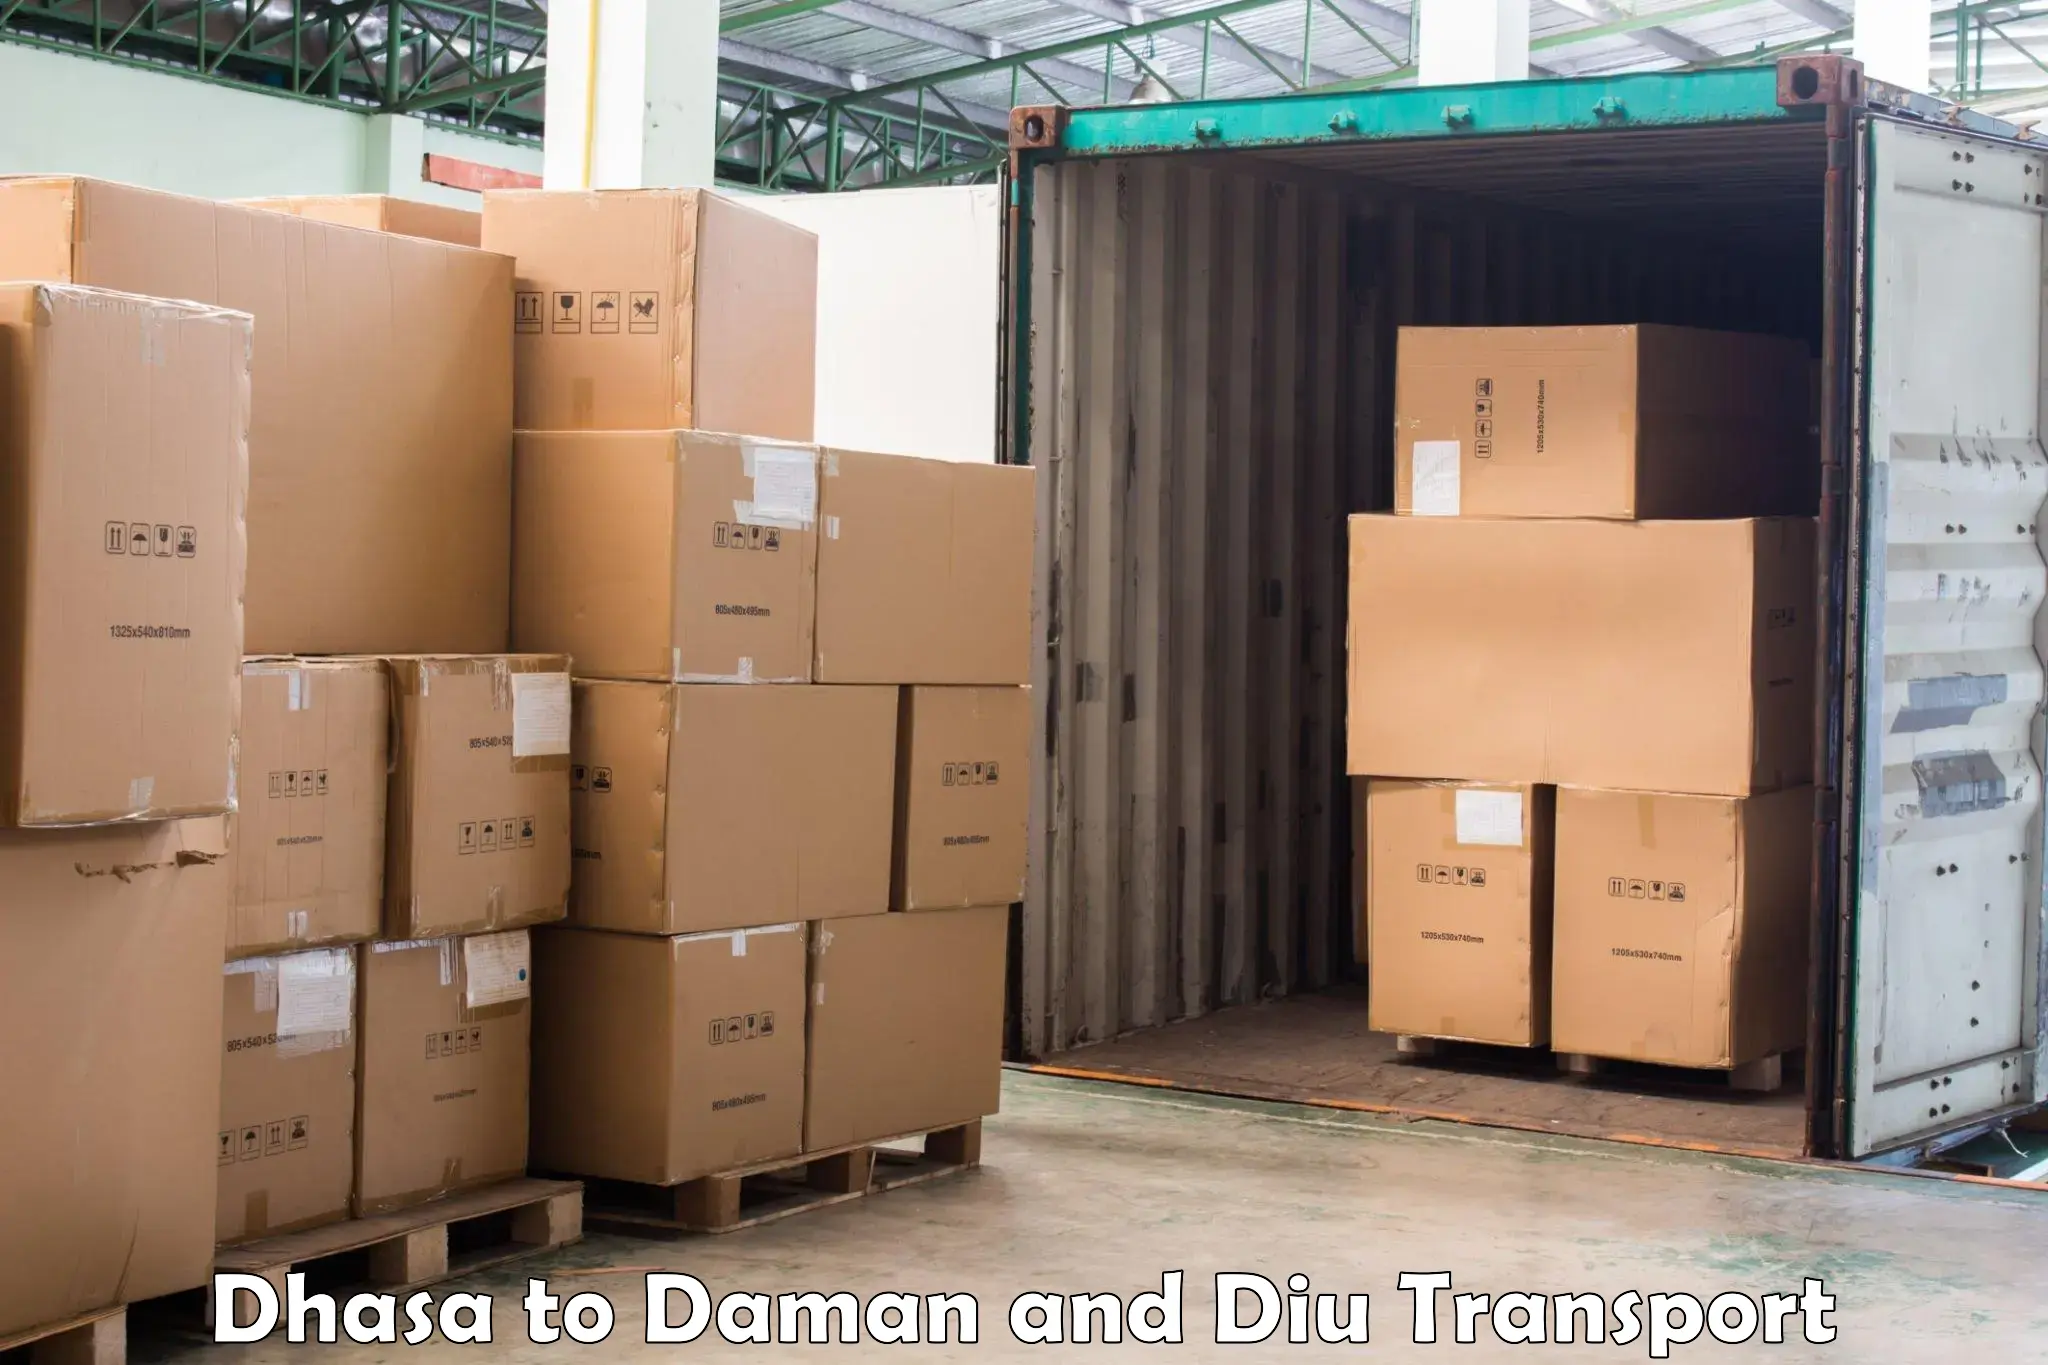 Daily transport service Dhasa to Daman and Diu